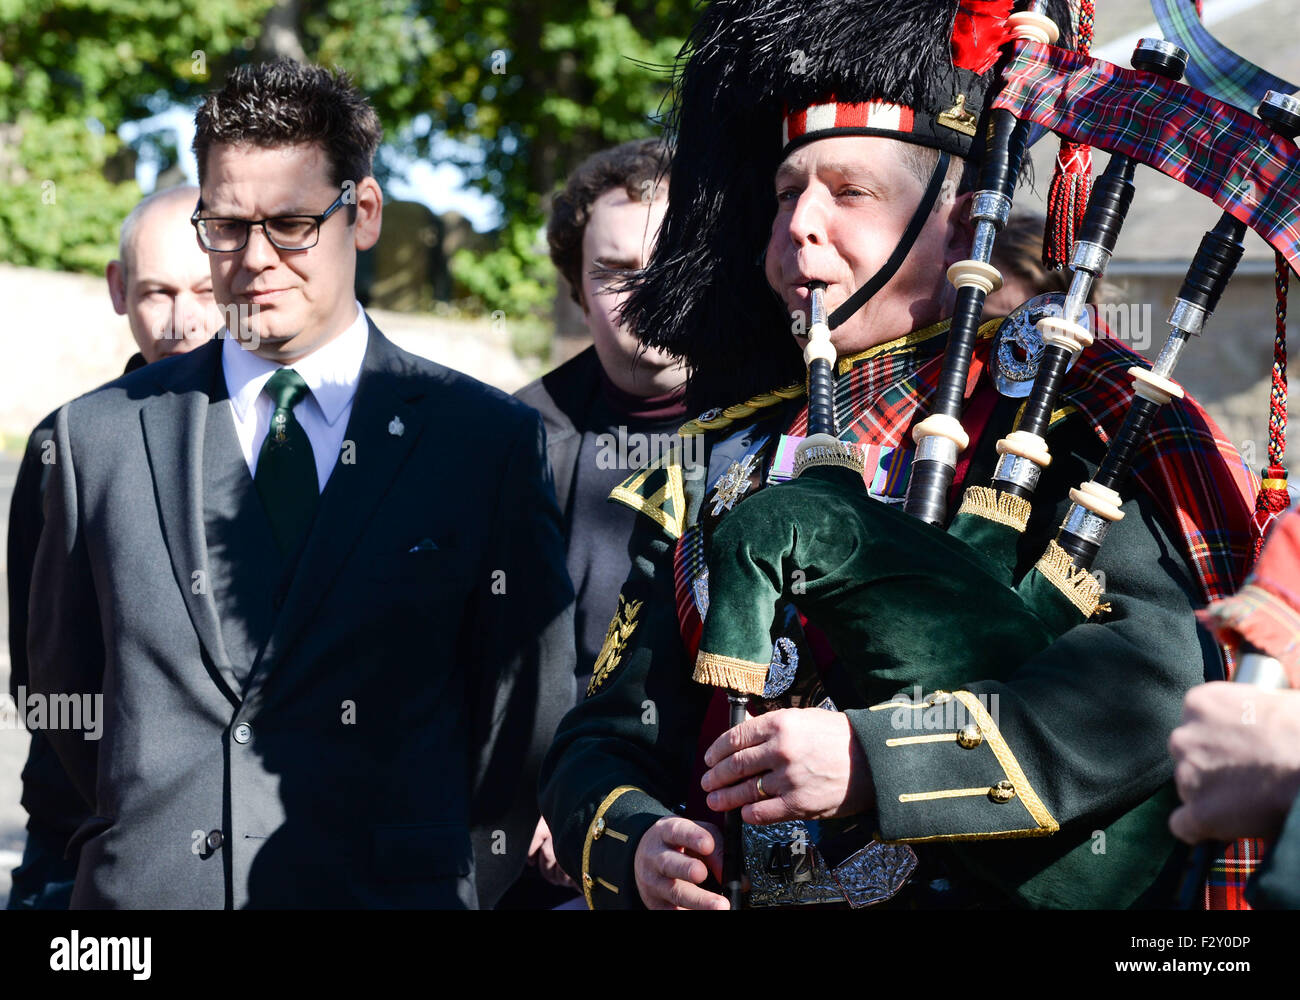 Swinton, UK. 25th Sep, 2015. Major Stevie Small, of the Black Watch, playing the bagpipes next to Kevin Laidlaw, Great Grandson of Piper Laidlaw.  The Laying of the Commerative VC Stone in the small Scottish Border village of Swinton to mark the 100th Anniversary of the award of the Victoria Cross to Piper Daniel Laidlaw for his actions whilst serving with the 7th Battalion of the King's Own Scottish Borderers.   Daniel Logan Laidlaw was born at Little Swinton, Berwickshire on 26 July 1875 and joined the Army in 1896. Stock Photo